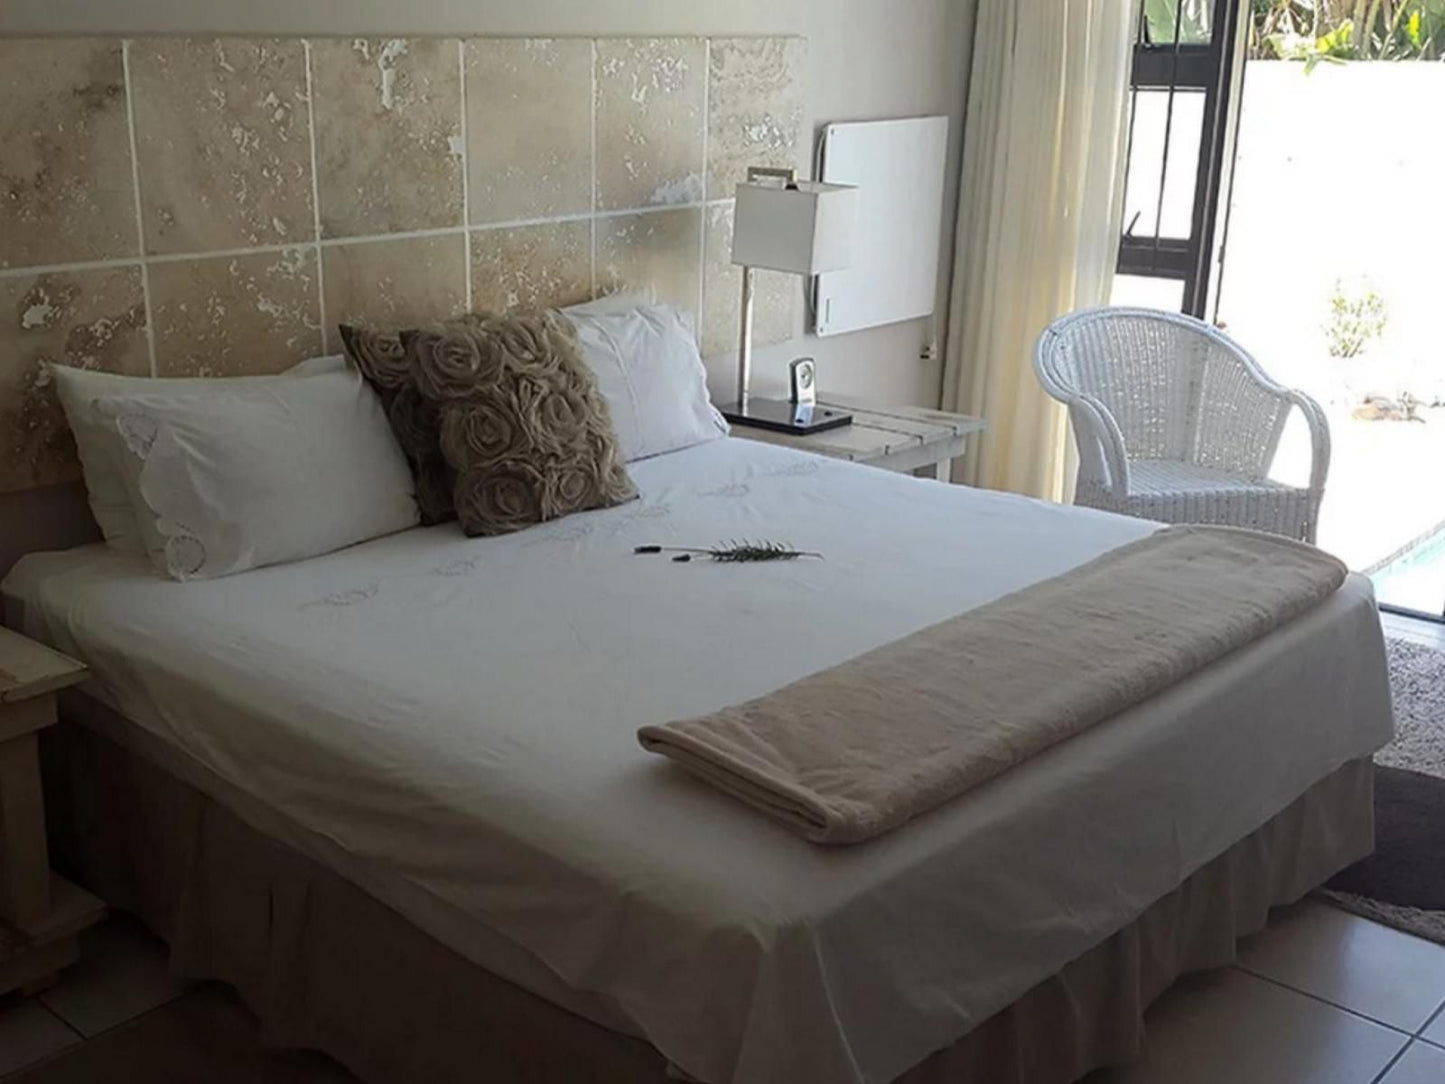 Crystalvilla Guest House West Beach Blouberg Western Cape South Africa Unsaturated, Bedroom